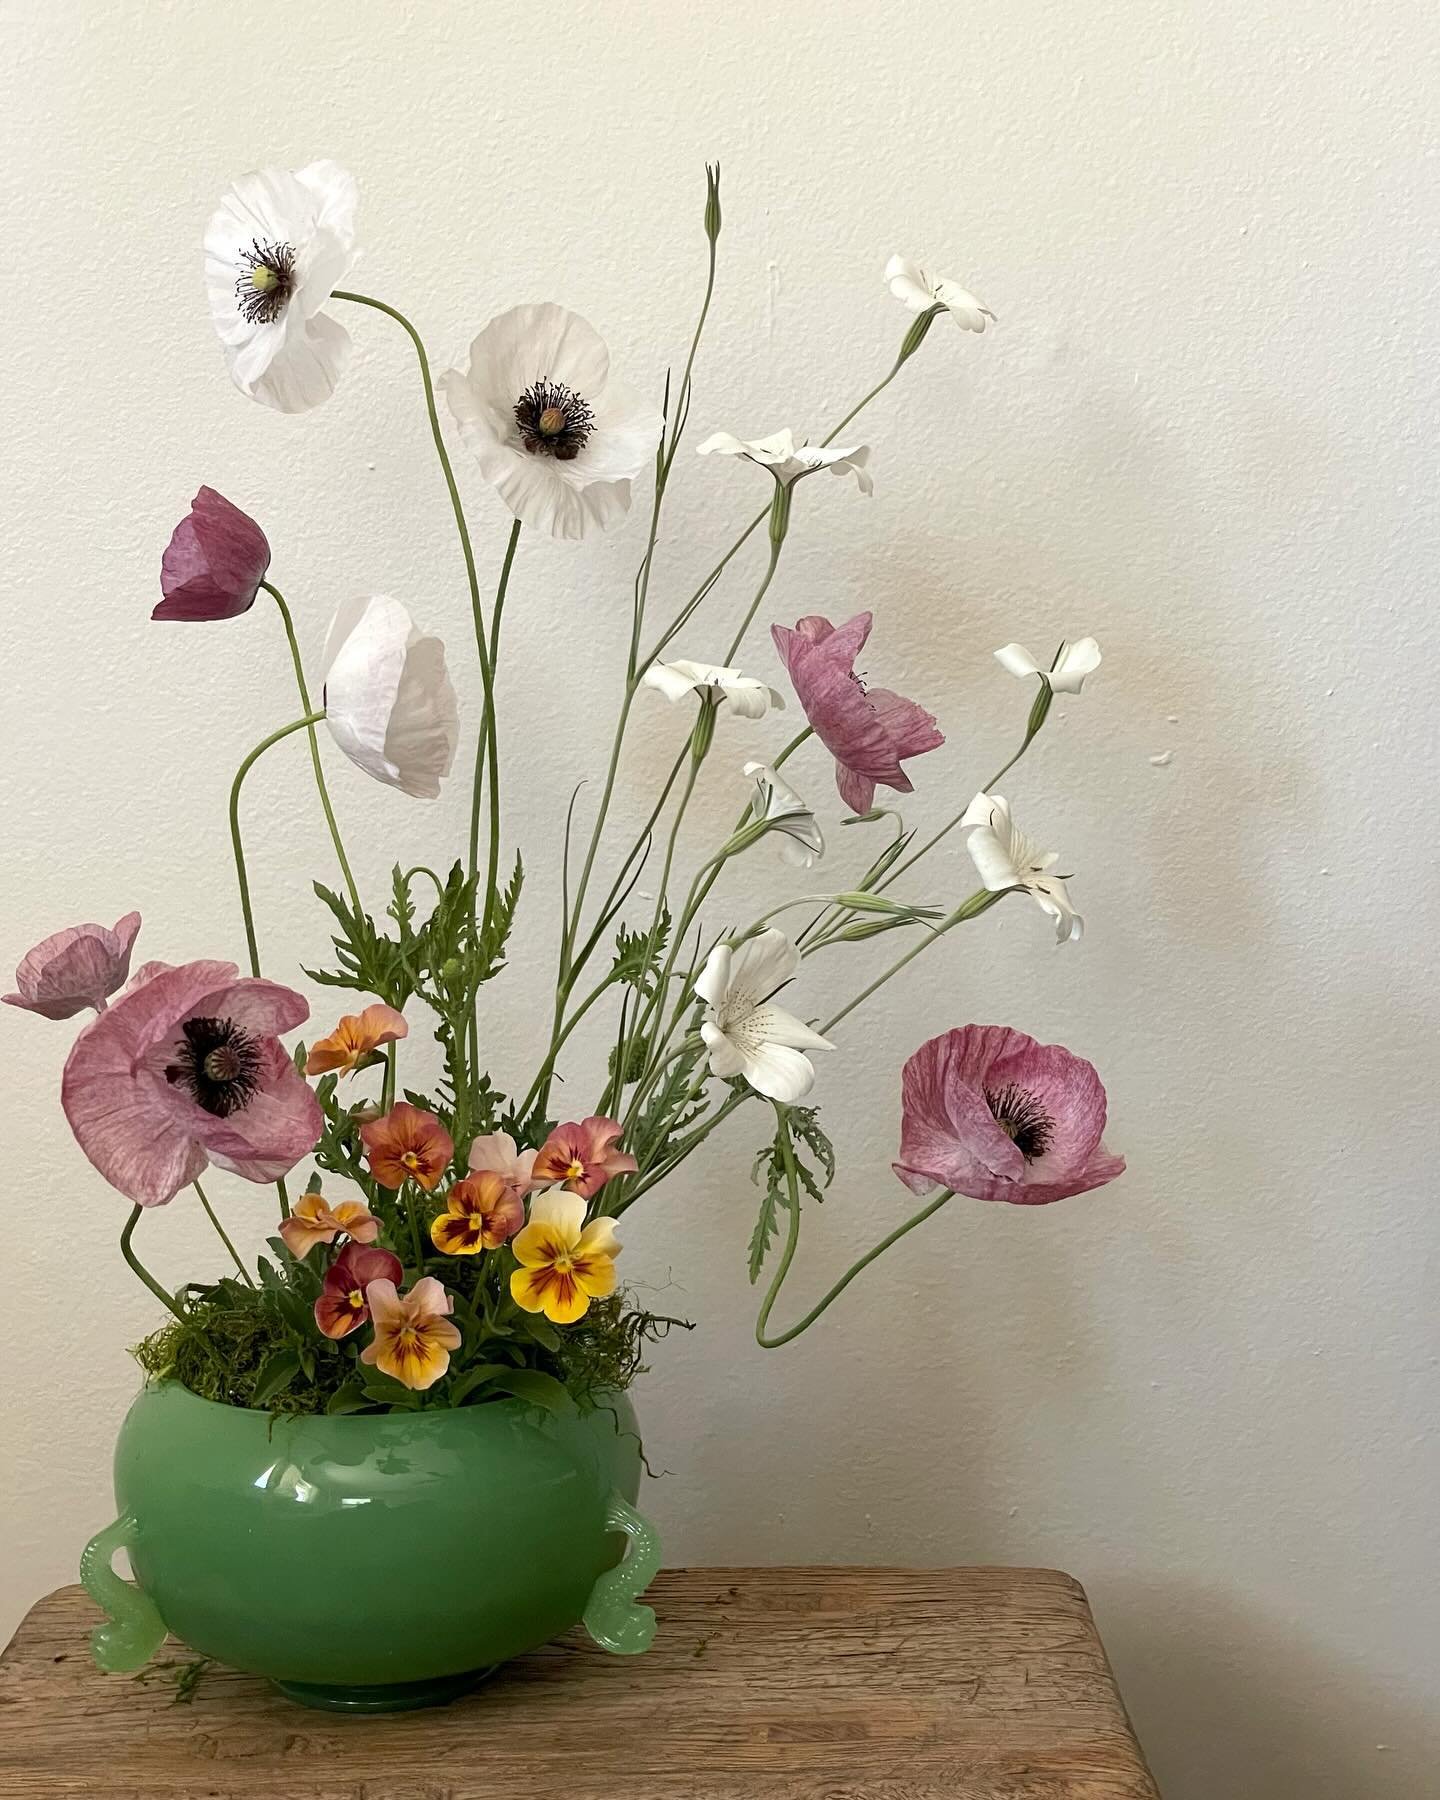 The three flowers that I have tried unsuccessfully to grow or have wanted to grow for a long time are in this arrangement. 

I first came across Corncockle when I was freelancing for @vervainflowers in England some years back. I had never seen it in 